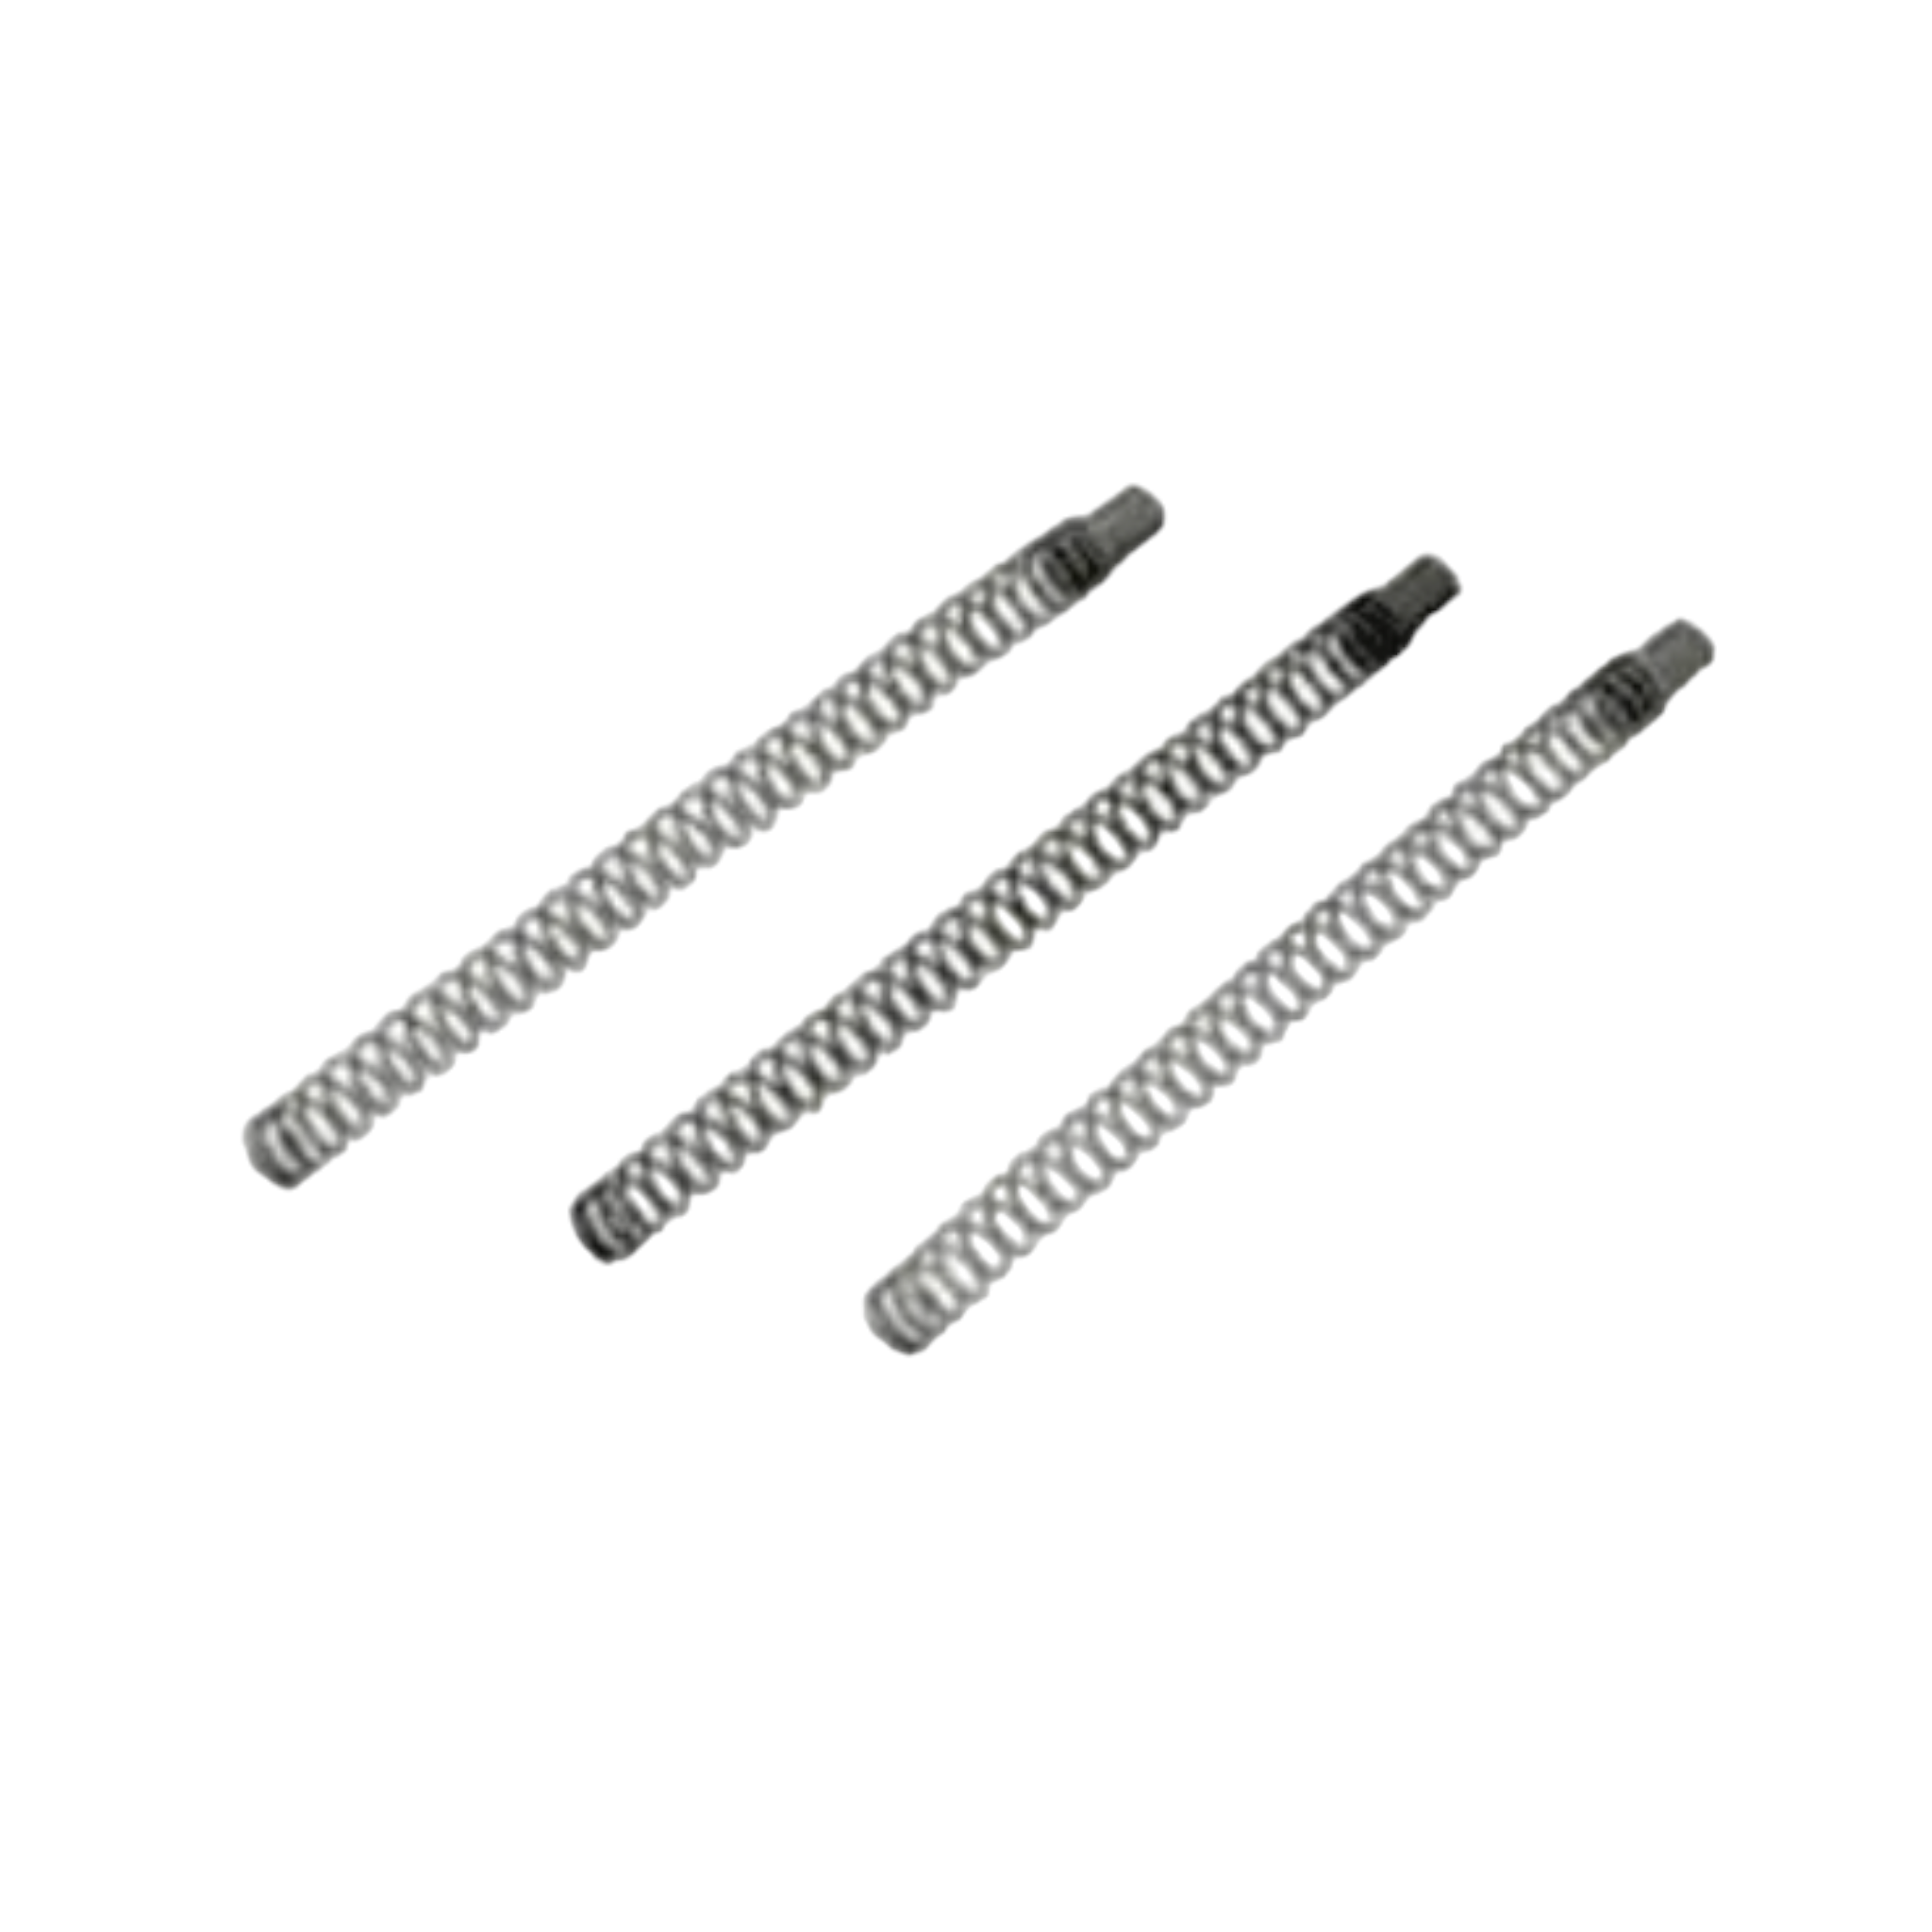 AIP Enhanced Loading Nozzle Spring (Standard, 120%, 140%)